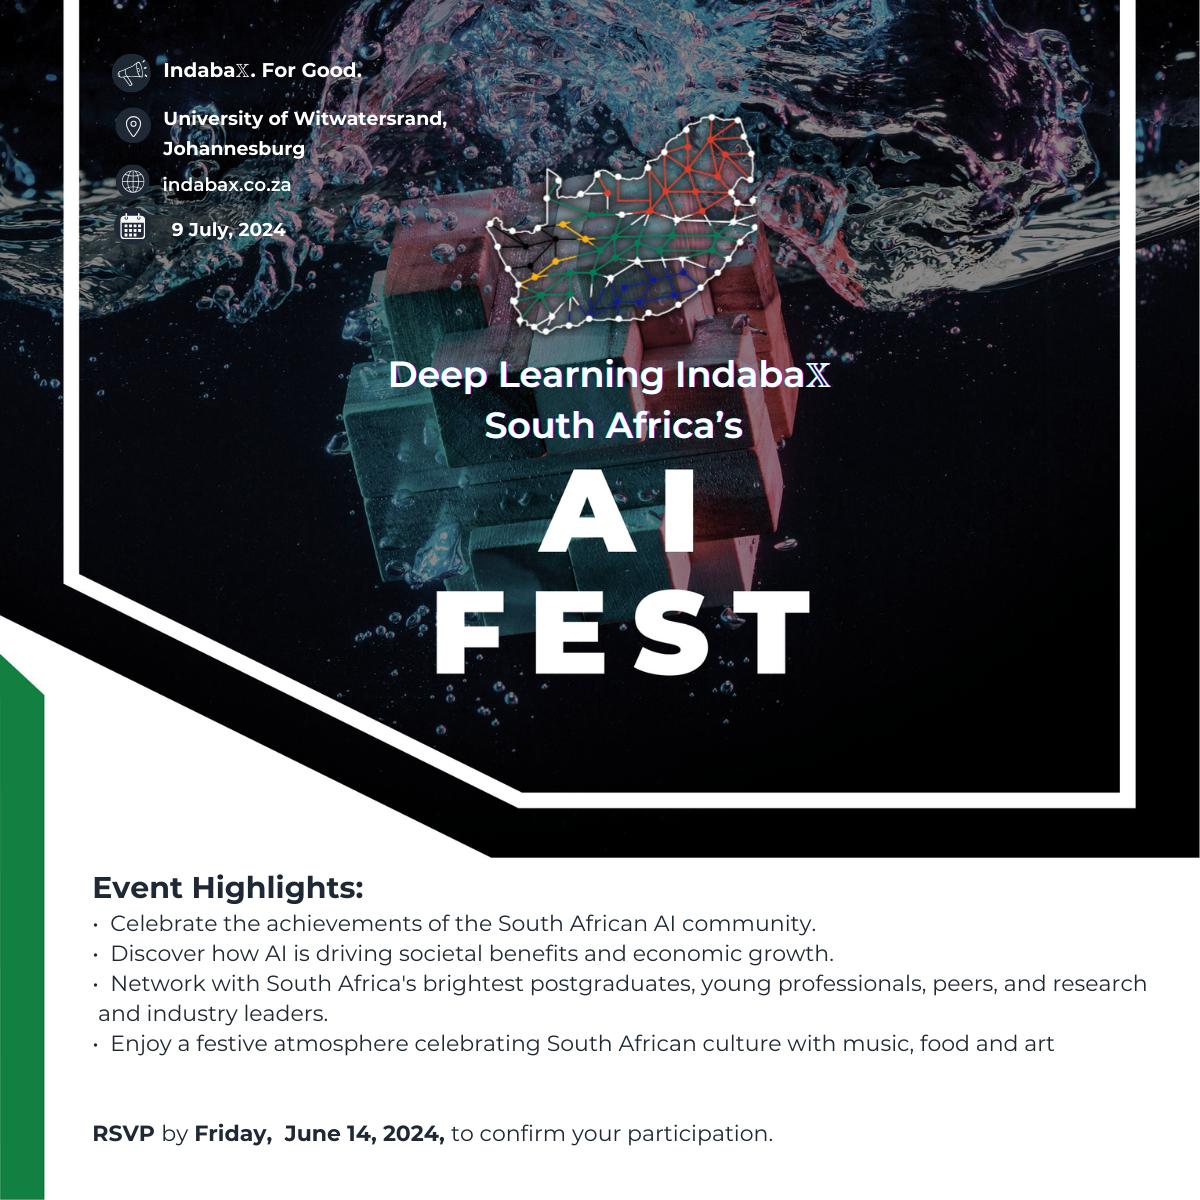 We are excited to announce the opening event of Indaba𝕏 South Africa, the AI Fest, and we would love for your organisations & research labs to be a part of it! Reserve a booth for R2500 which helps cover logistics. We recommend 2 people per booth. RSVP: docs.google.com/forms/d/1a2fqy…